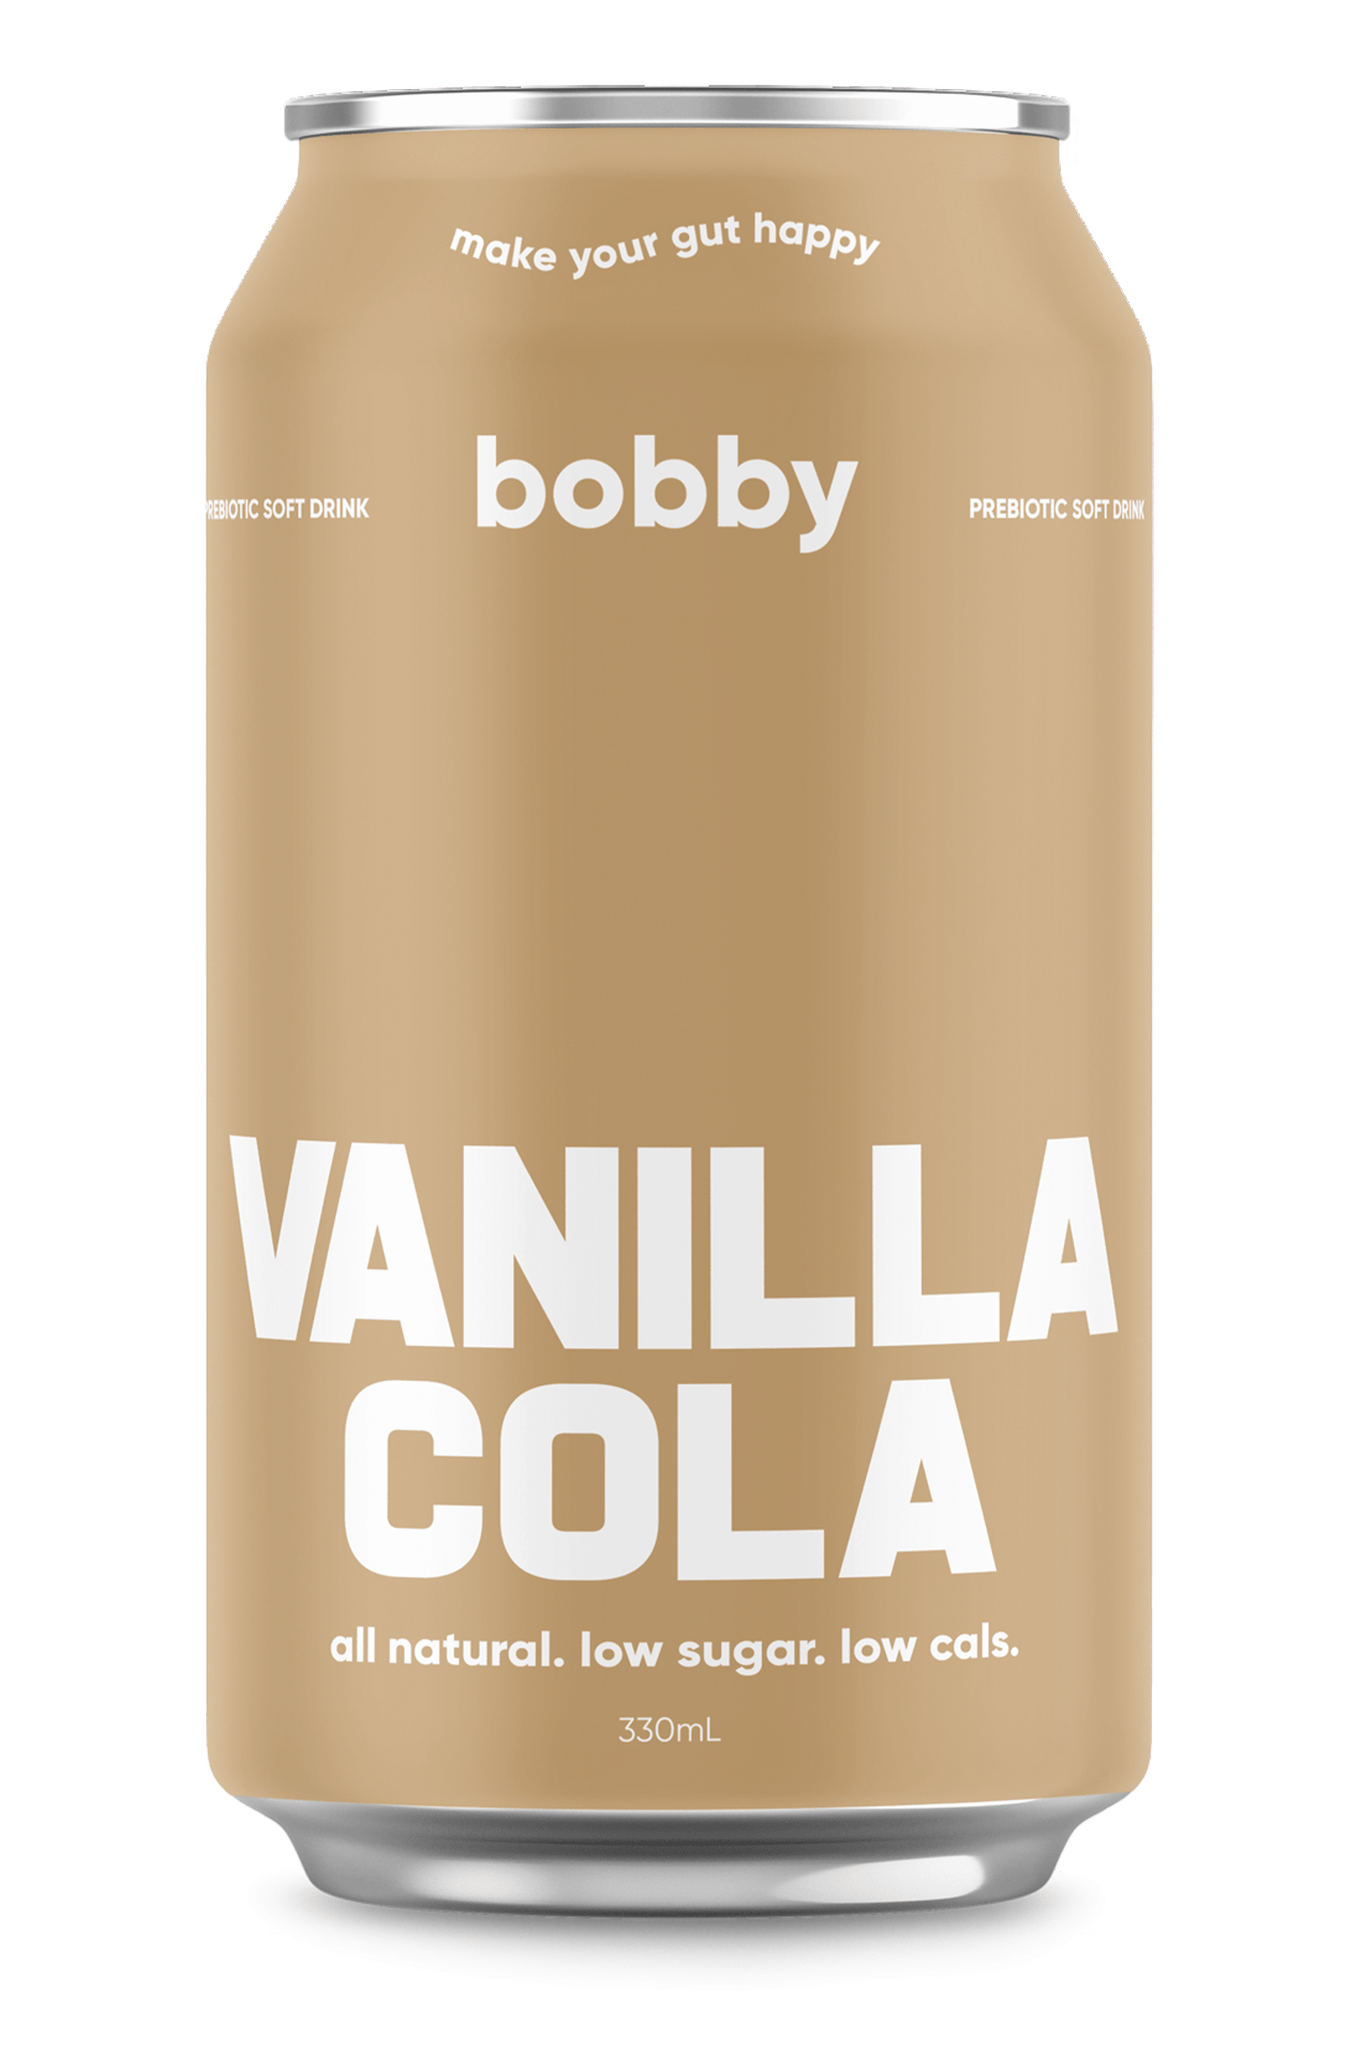 Vanilla Cola with natural ingredients, low sugar and low calories